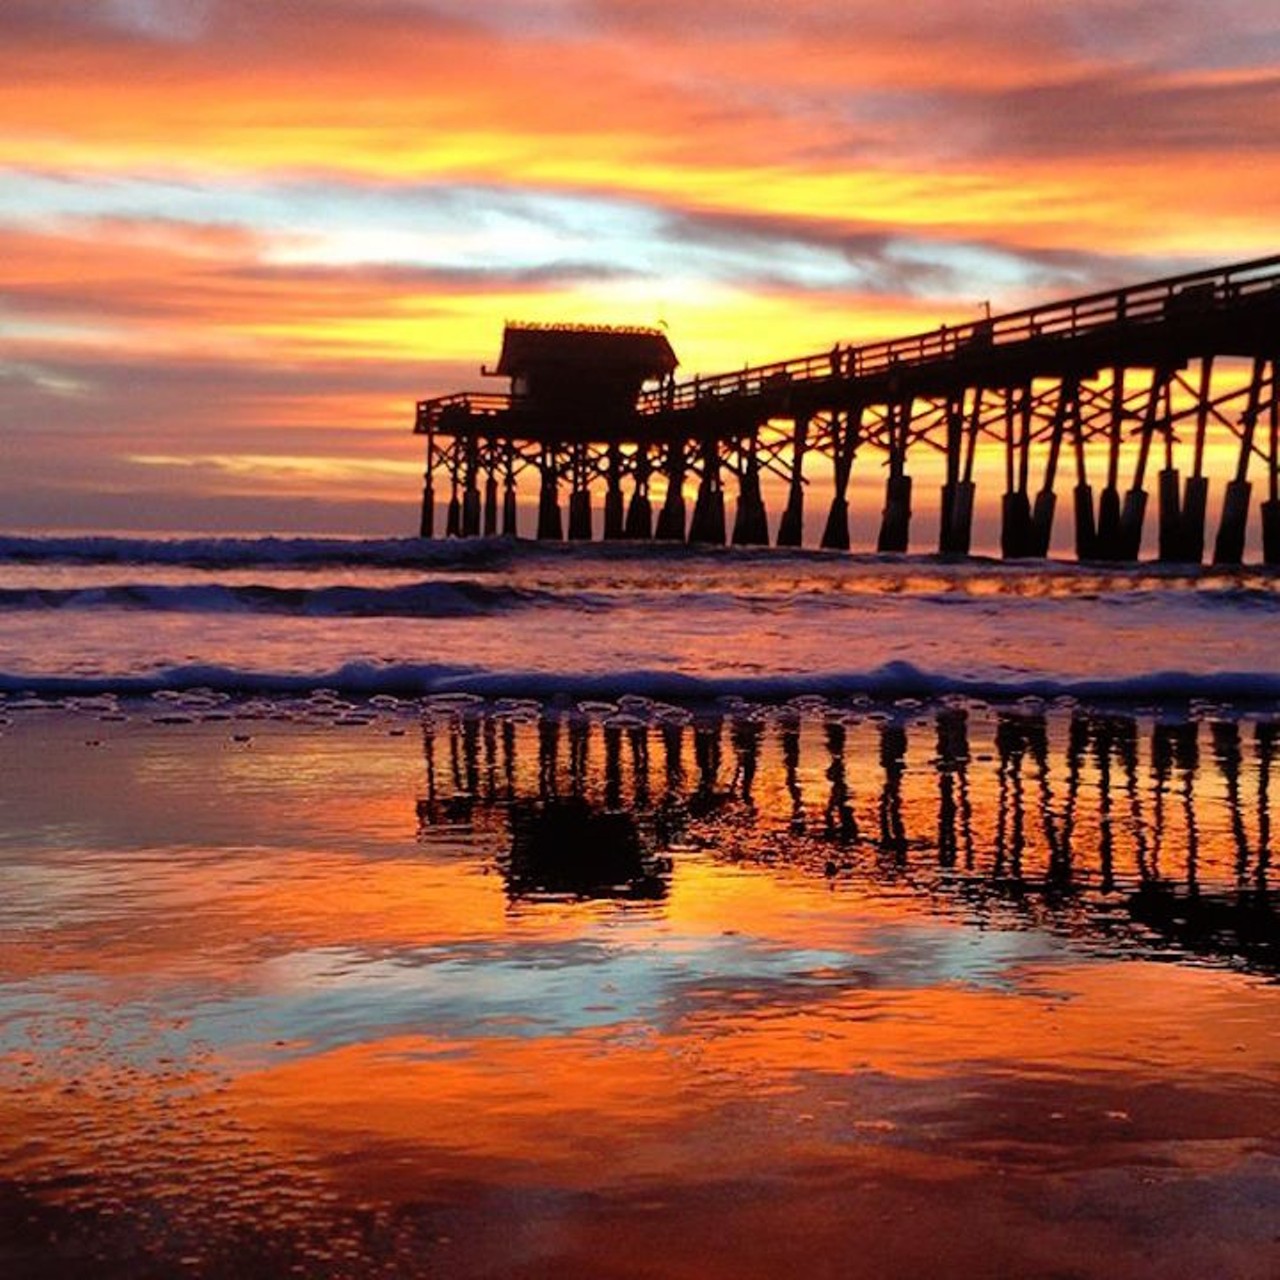 12. The Cocoa Beach pier
By this point in the day, you'll both probably be covered in sand, but those colors sure make it worth it.
Photo via sonsoftheseatv/Instagram